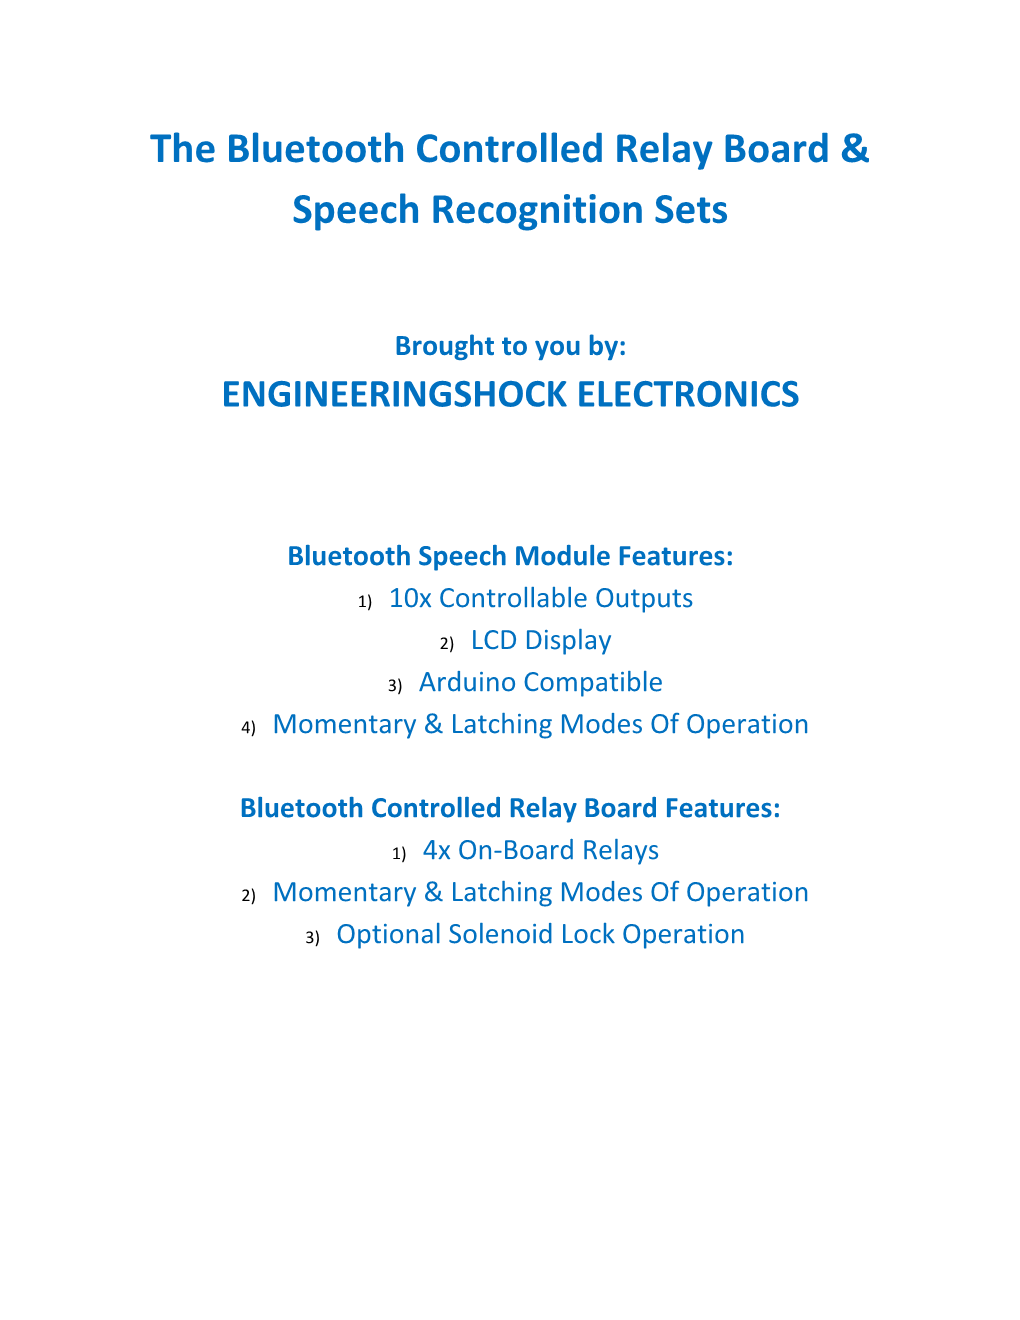 The Bluetooth Controlled Relay Board & Speech Recognition Sets